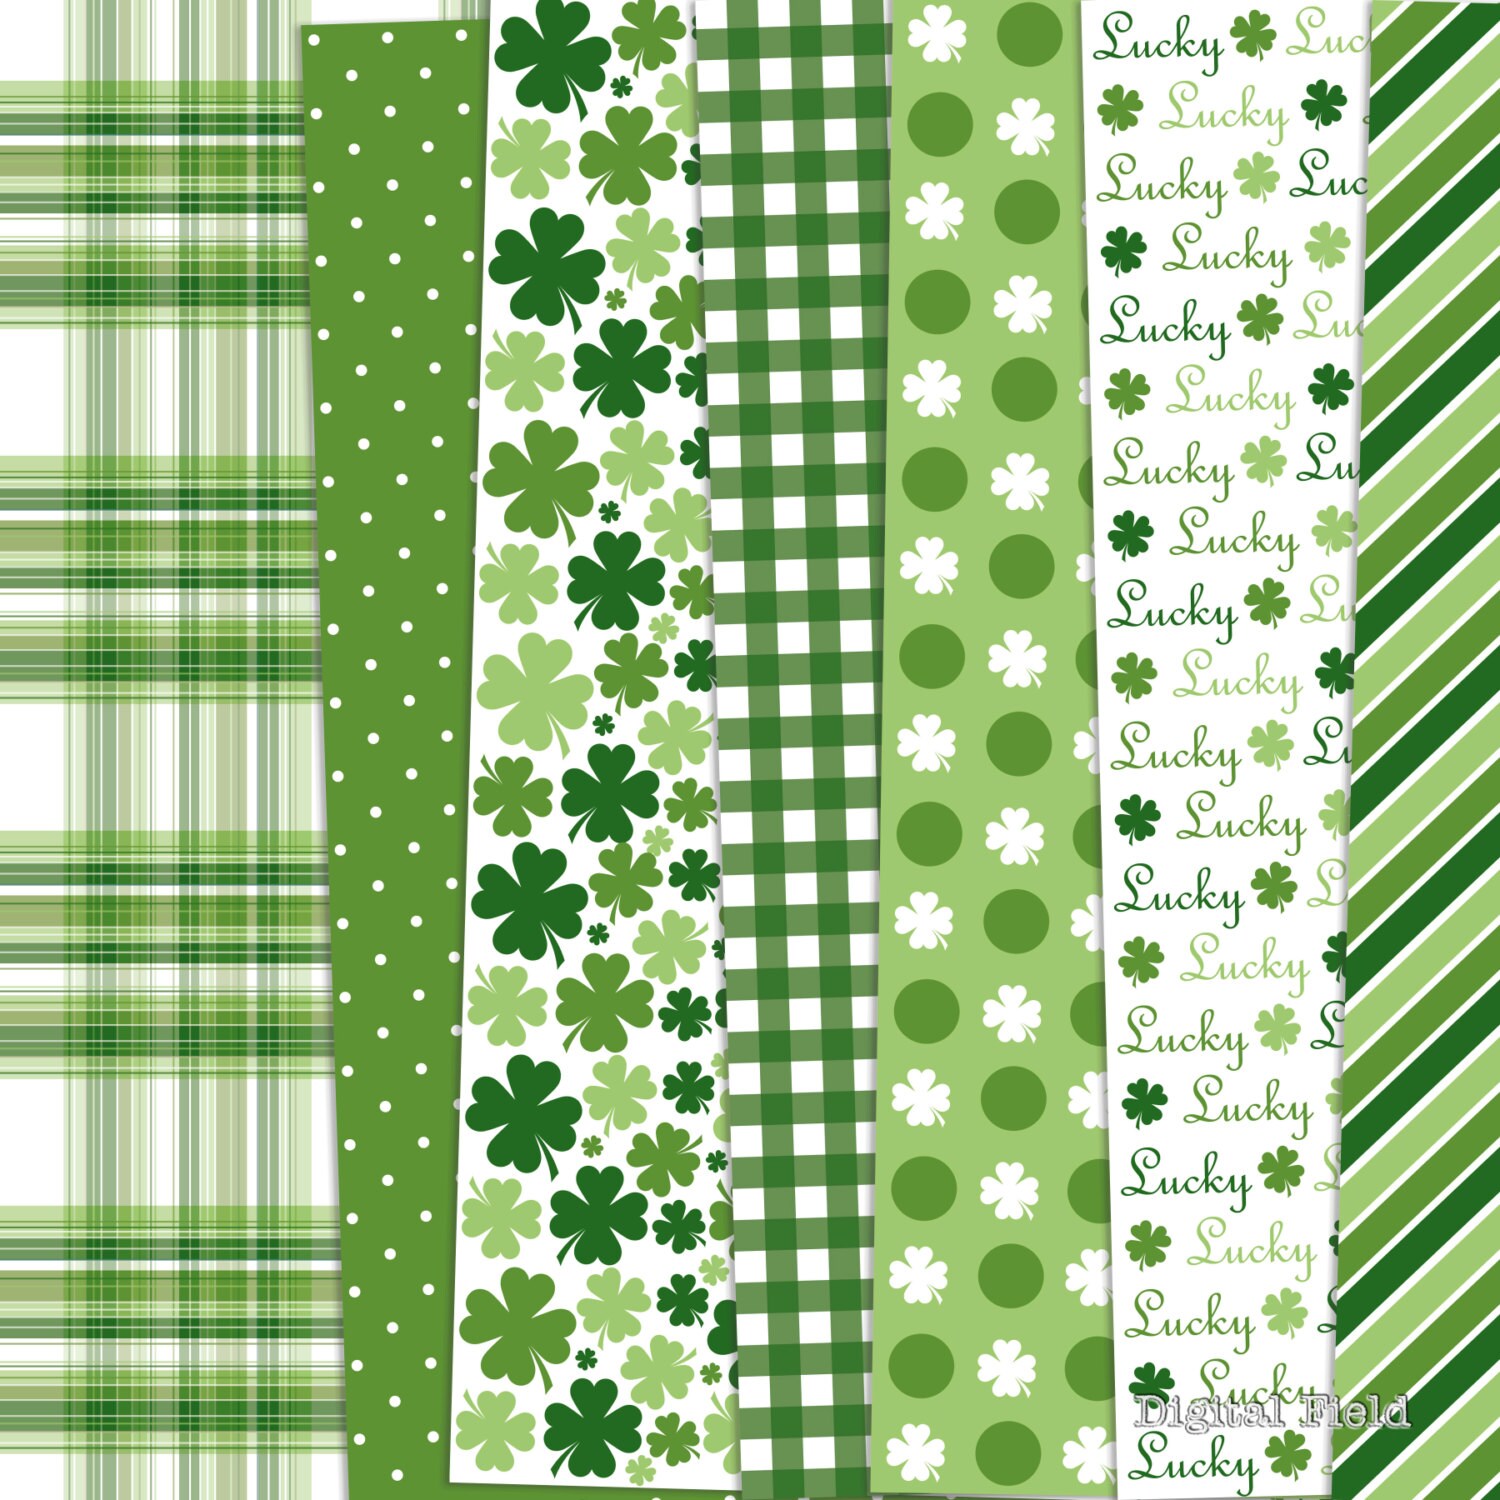 st-patrick-s-day-no-2-digital-scrapbooking-paper-pack